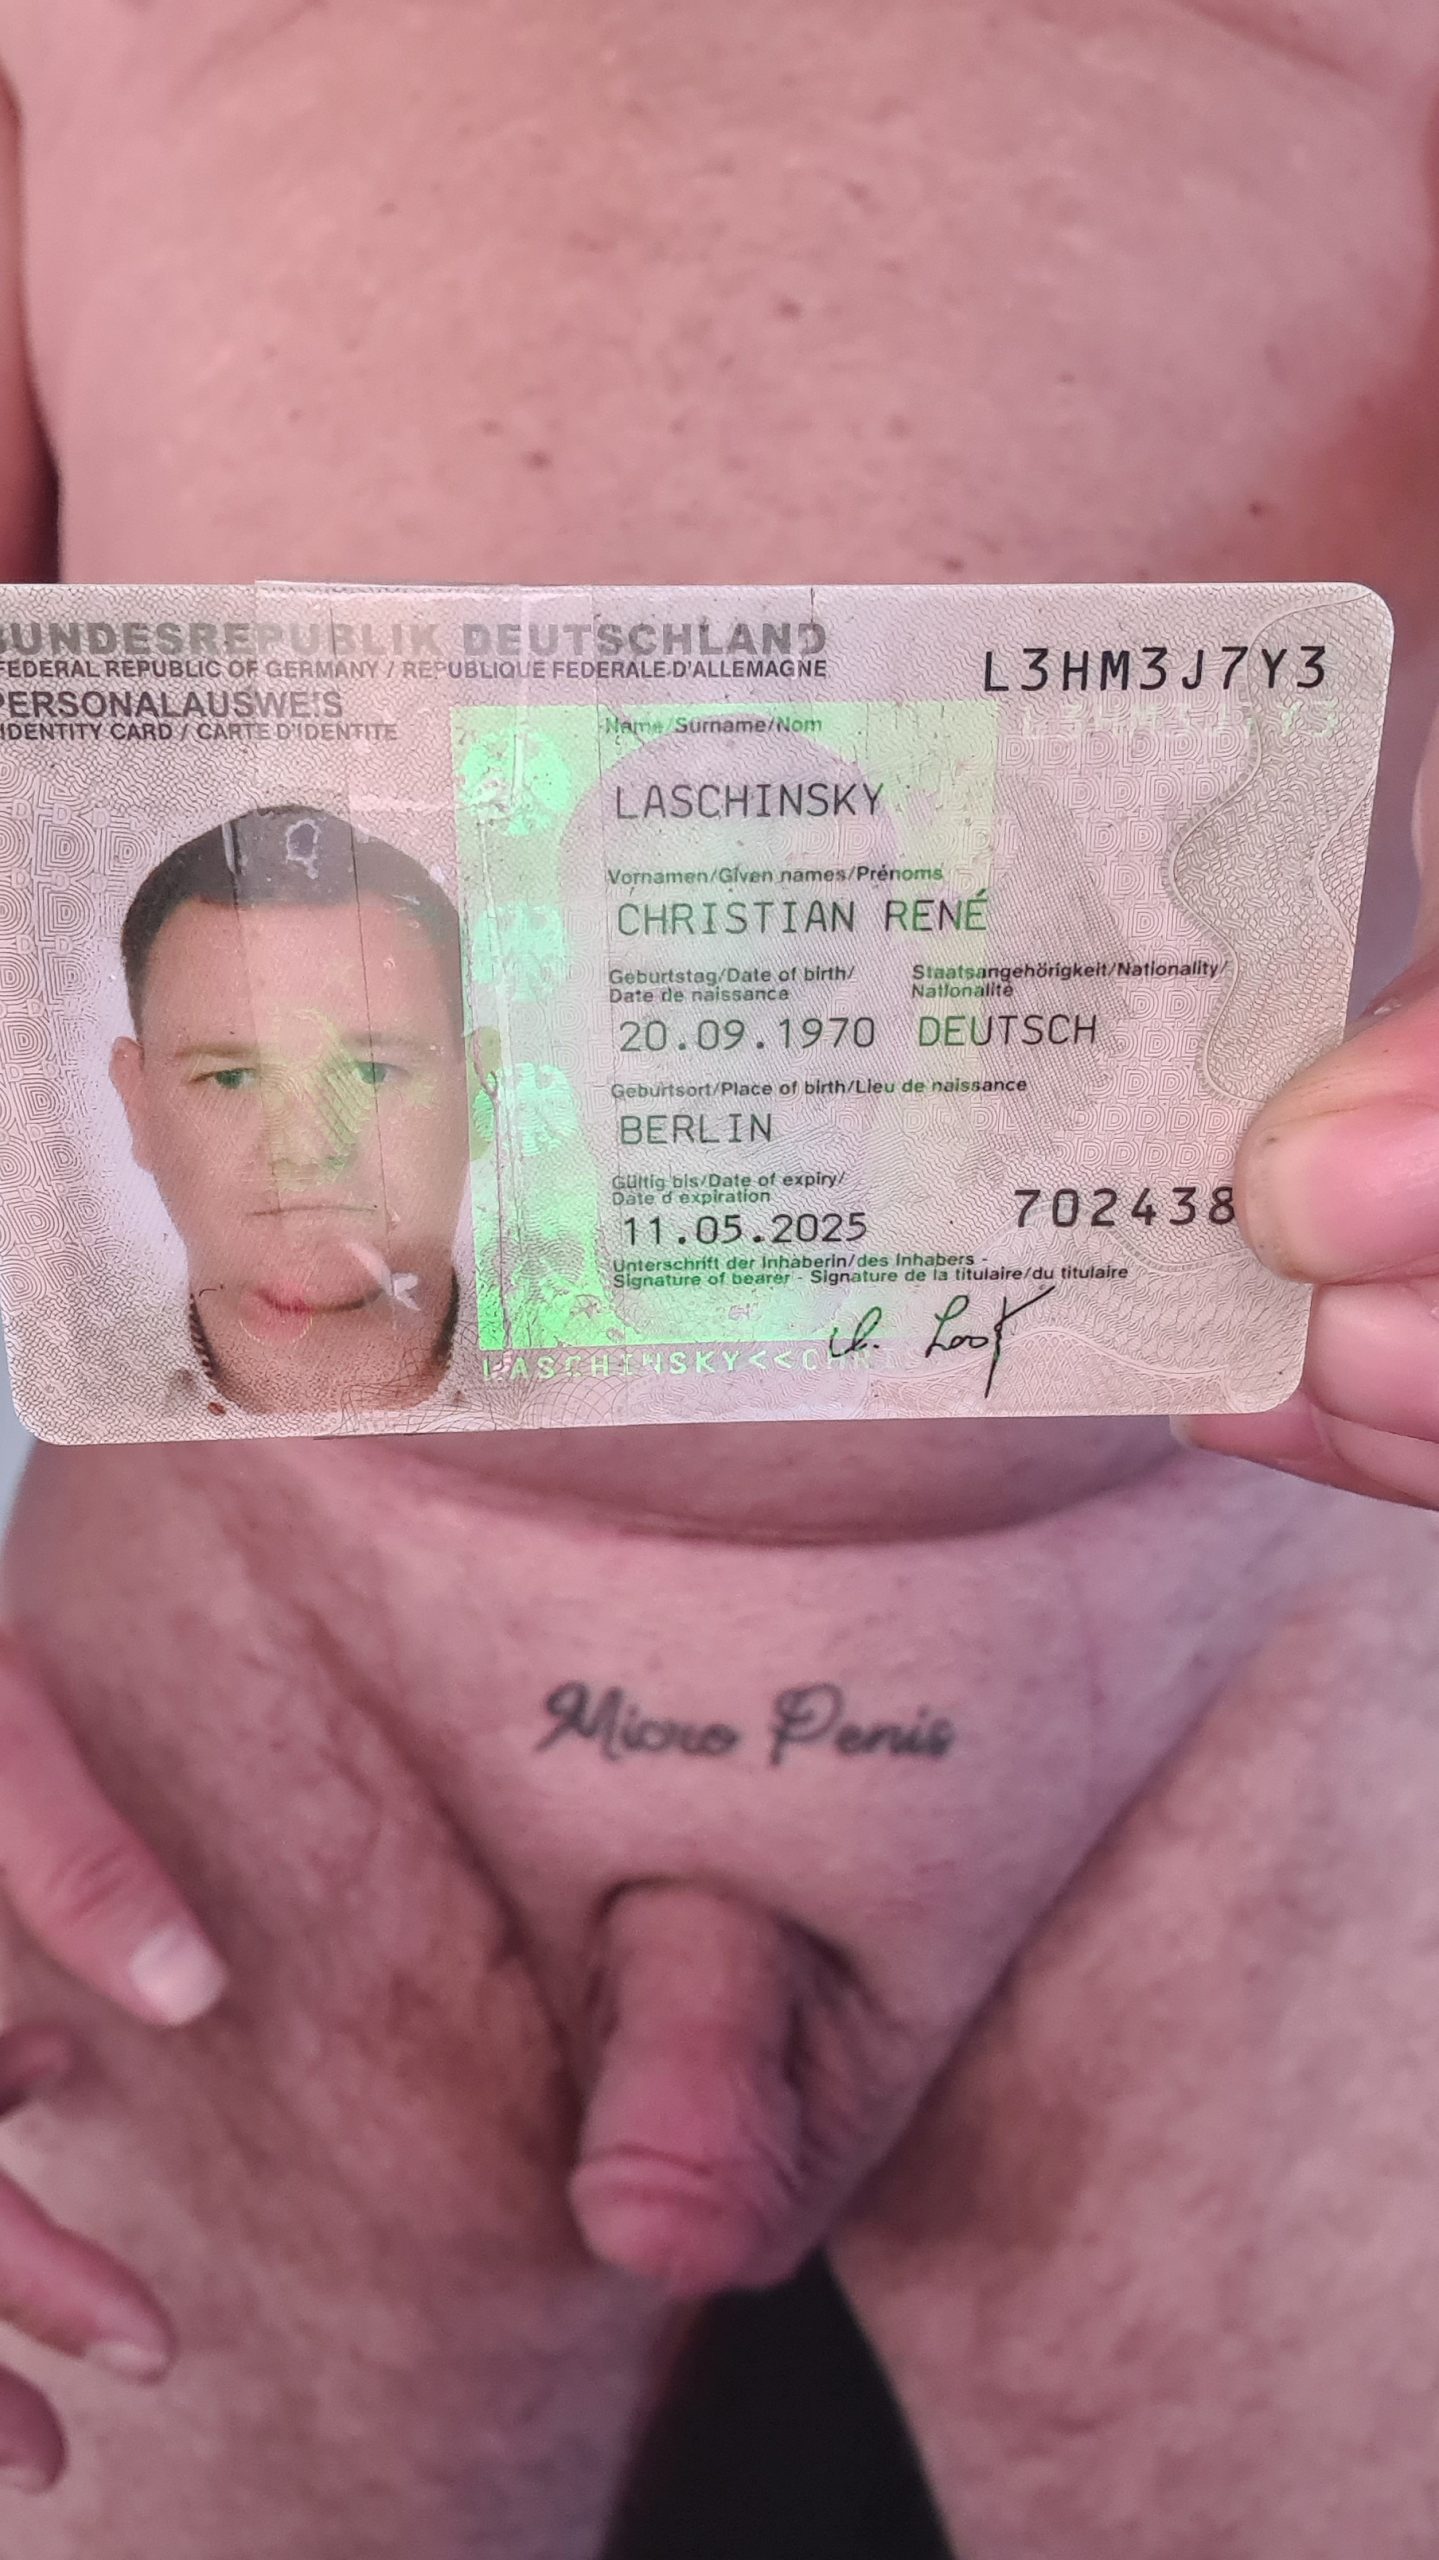 My tiny MICRO PENIS with my ID